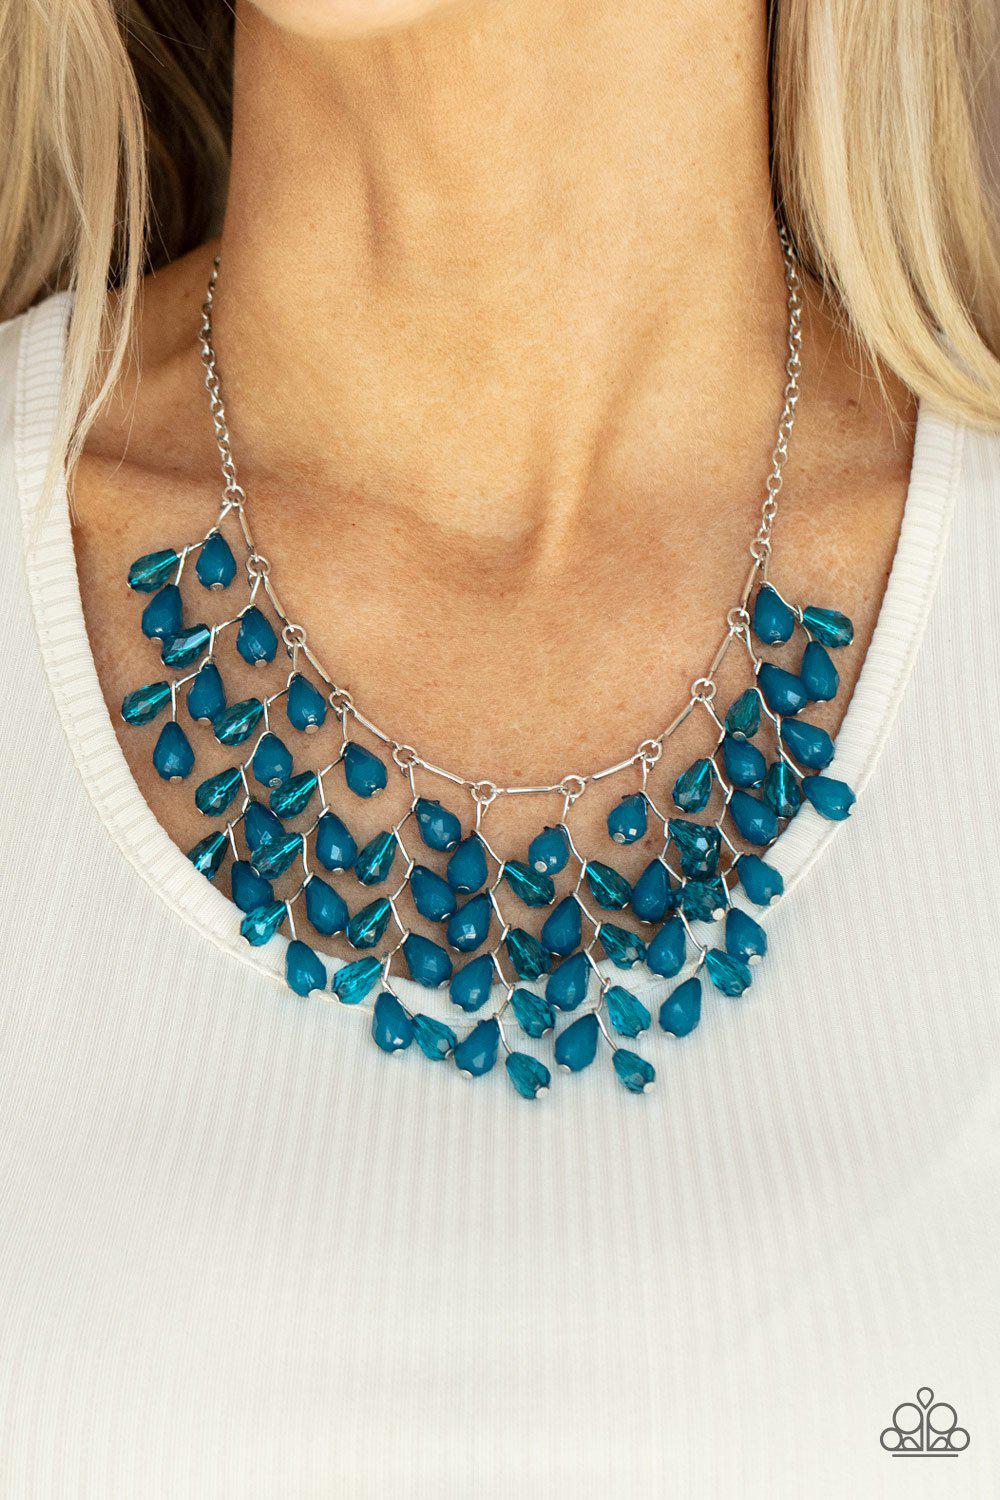 Garden Fairytale Blue and Silver Necklace - Paparazzi Accessories 2021 Convention Exclusive- lightbox - CarasShop.com - $5 Jewelry by Cara Jewels